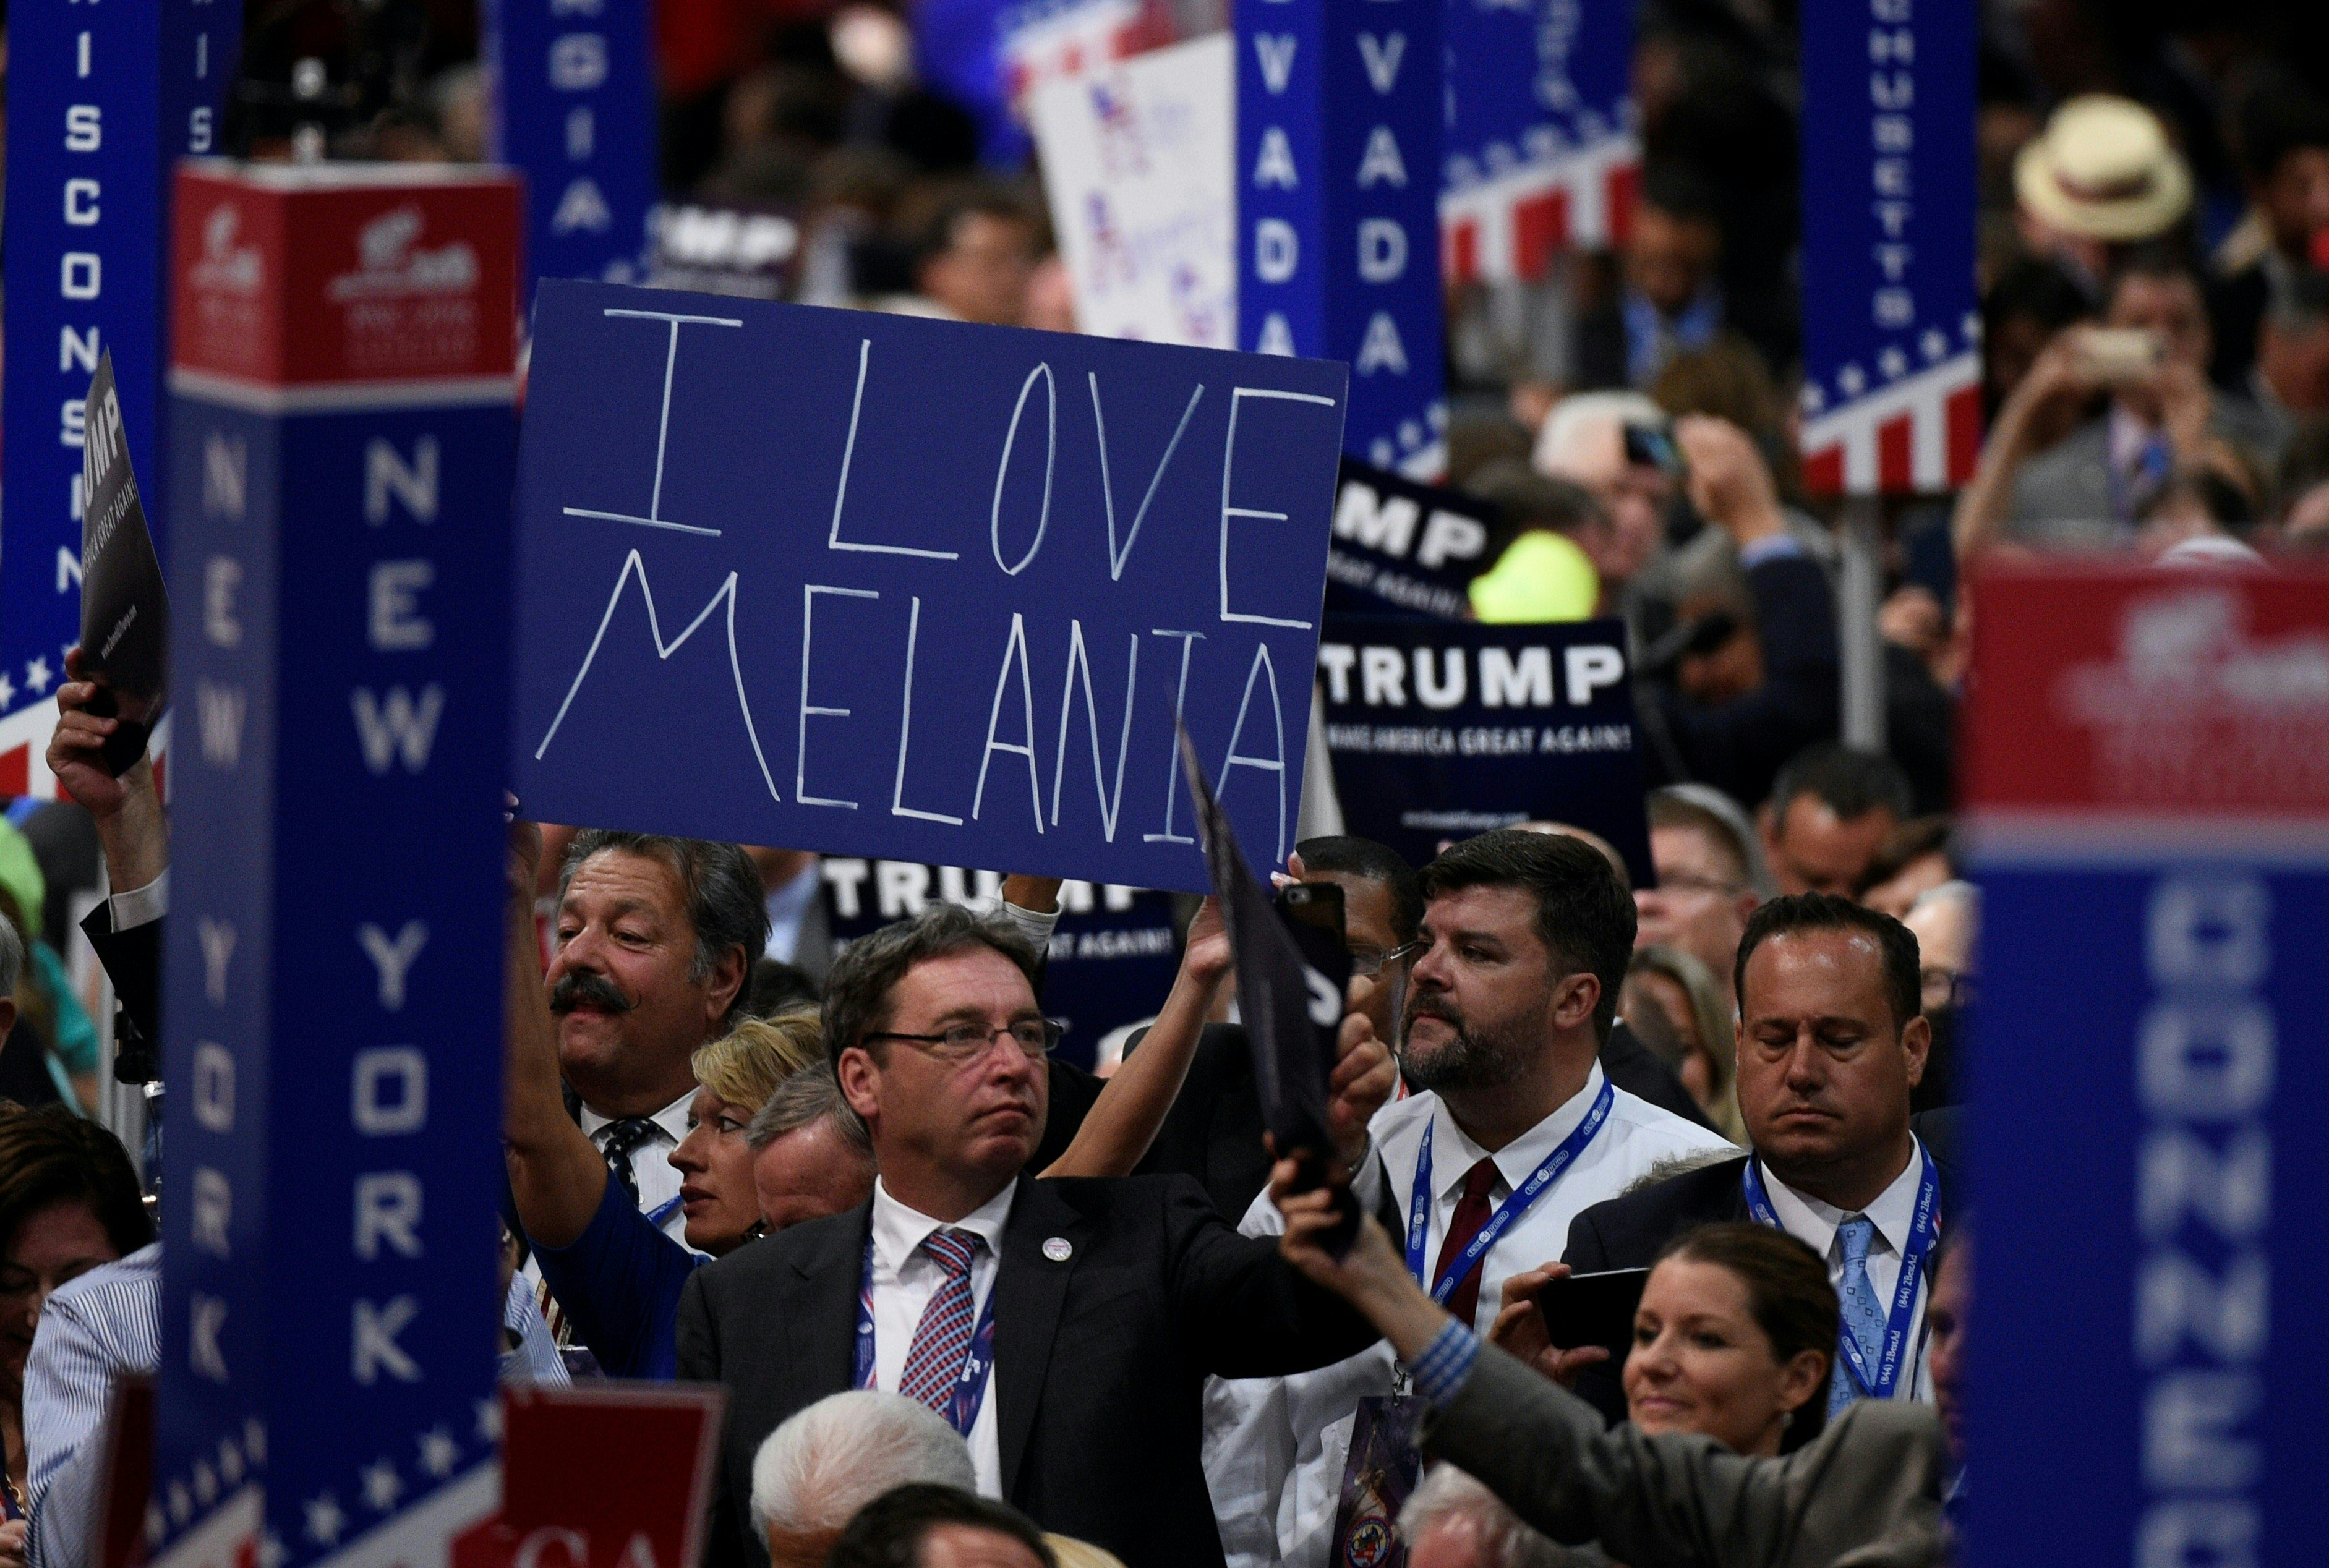 A delegate holds a sign during the second day of the Republican National Convention on July 19, 2016 at the Quicken Loans Arena in Cleveland, Ohio. The convention nominated Donald Trump for president. / AFP PHOTO / DOMINICK REUTER